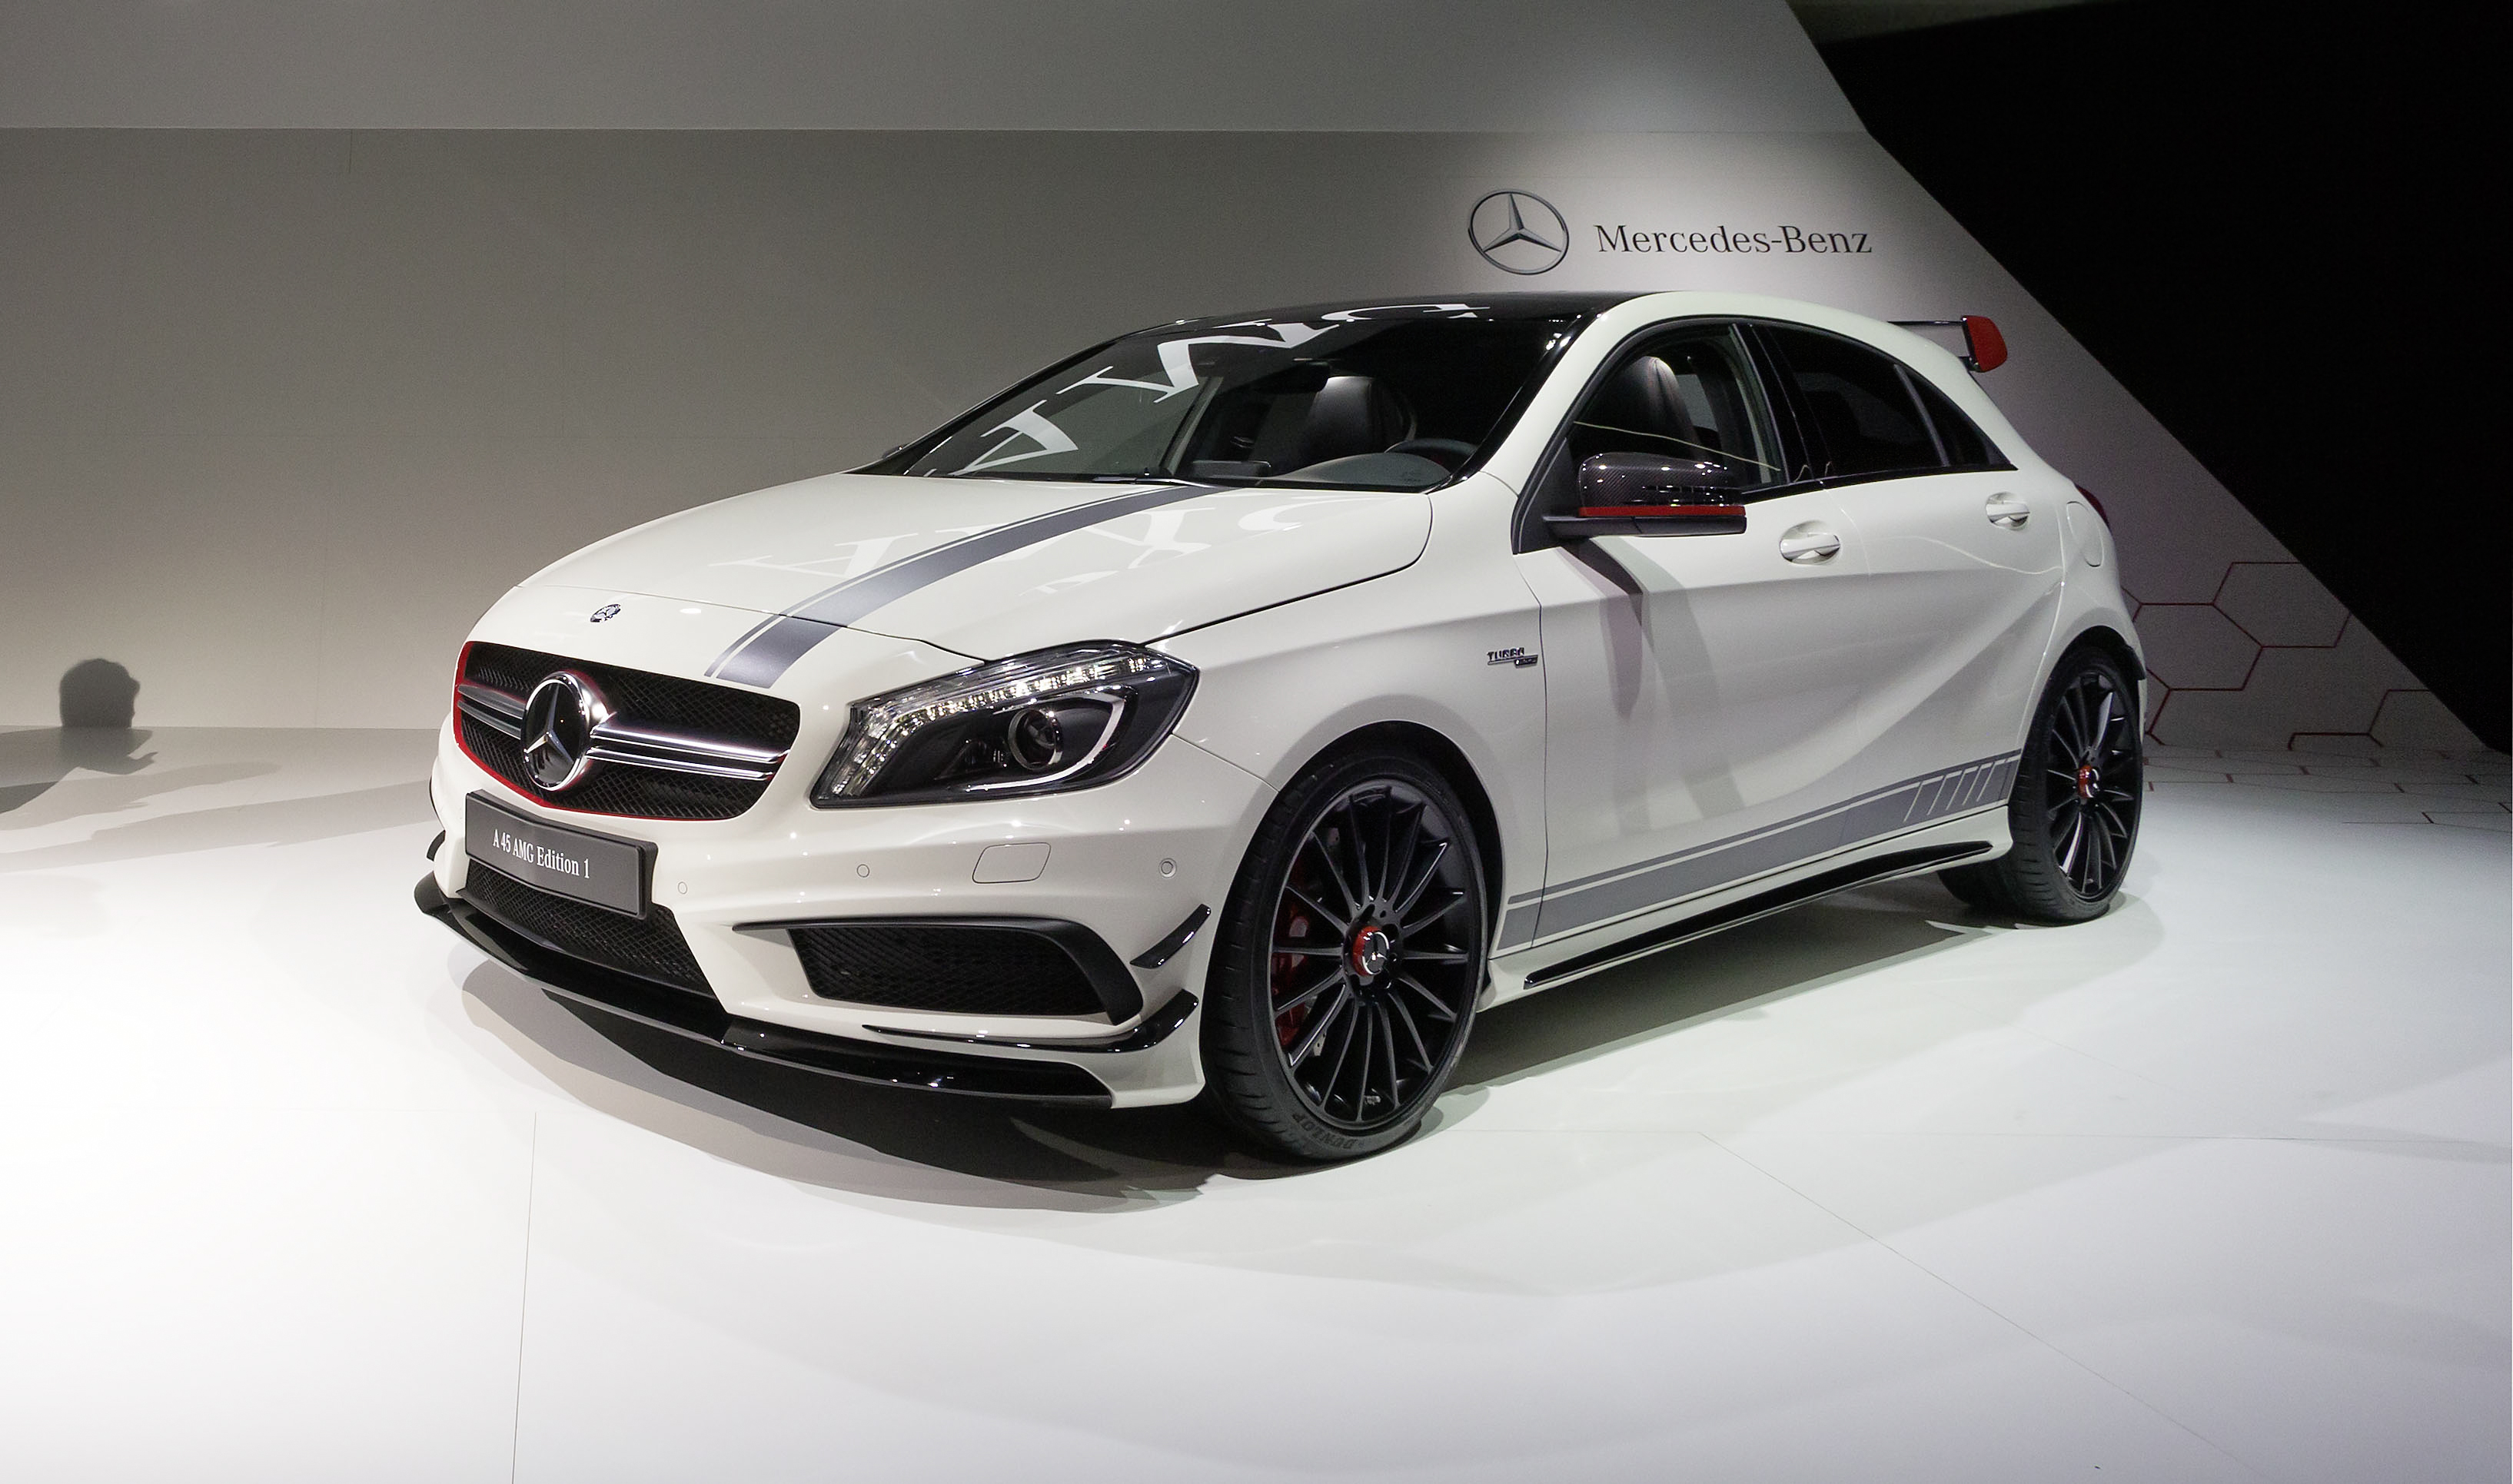 Mercedes Benz Amg A45 Wallpapers Vehicles Hq Mercedes Benz Amg Images, Photos, Reviews